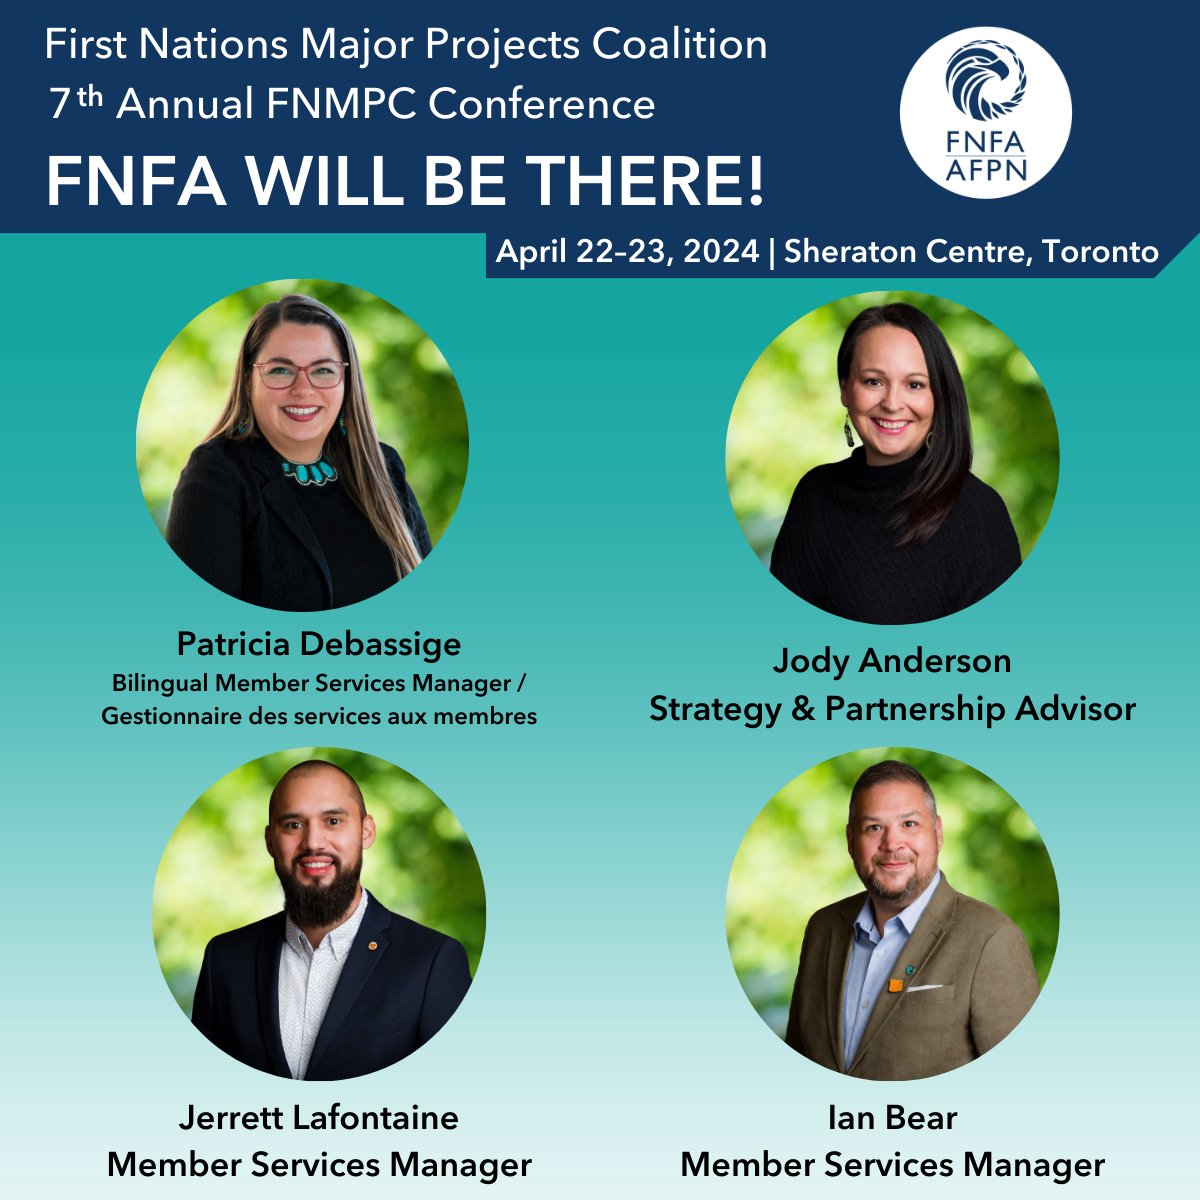 FNFA is excited to be attending the @fnmpc 7th Annual FNMPC Conference in Toronto, ON from April 22-23, 2024! If you would like to connect in person or virtually, send us a DM to schedule a meeting. #FNMPC #Conference #FNFA #Toronto